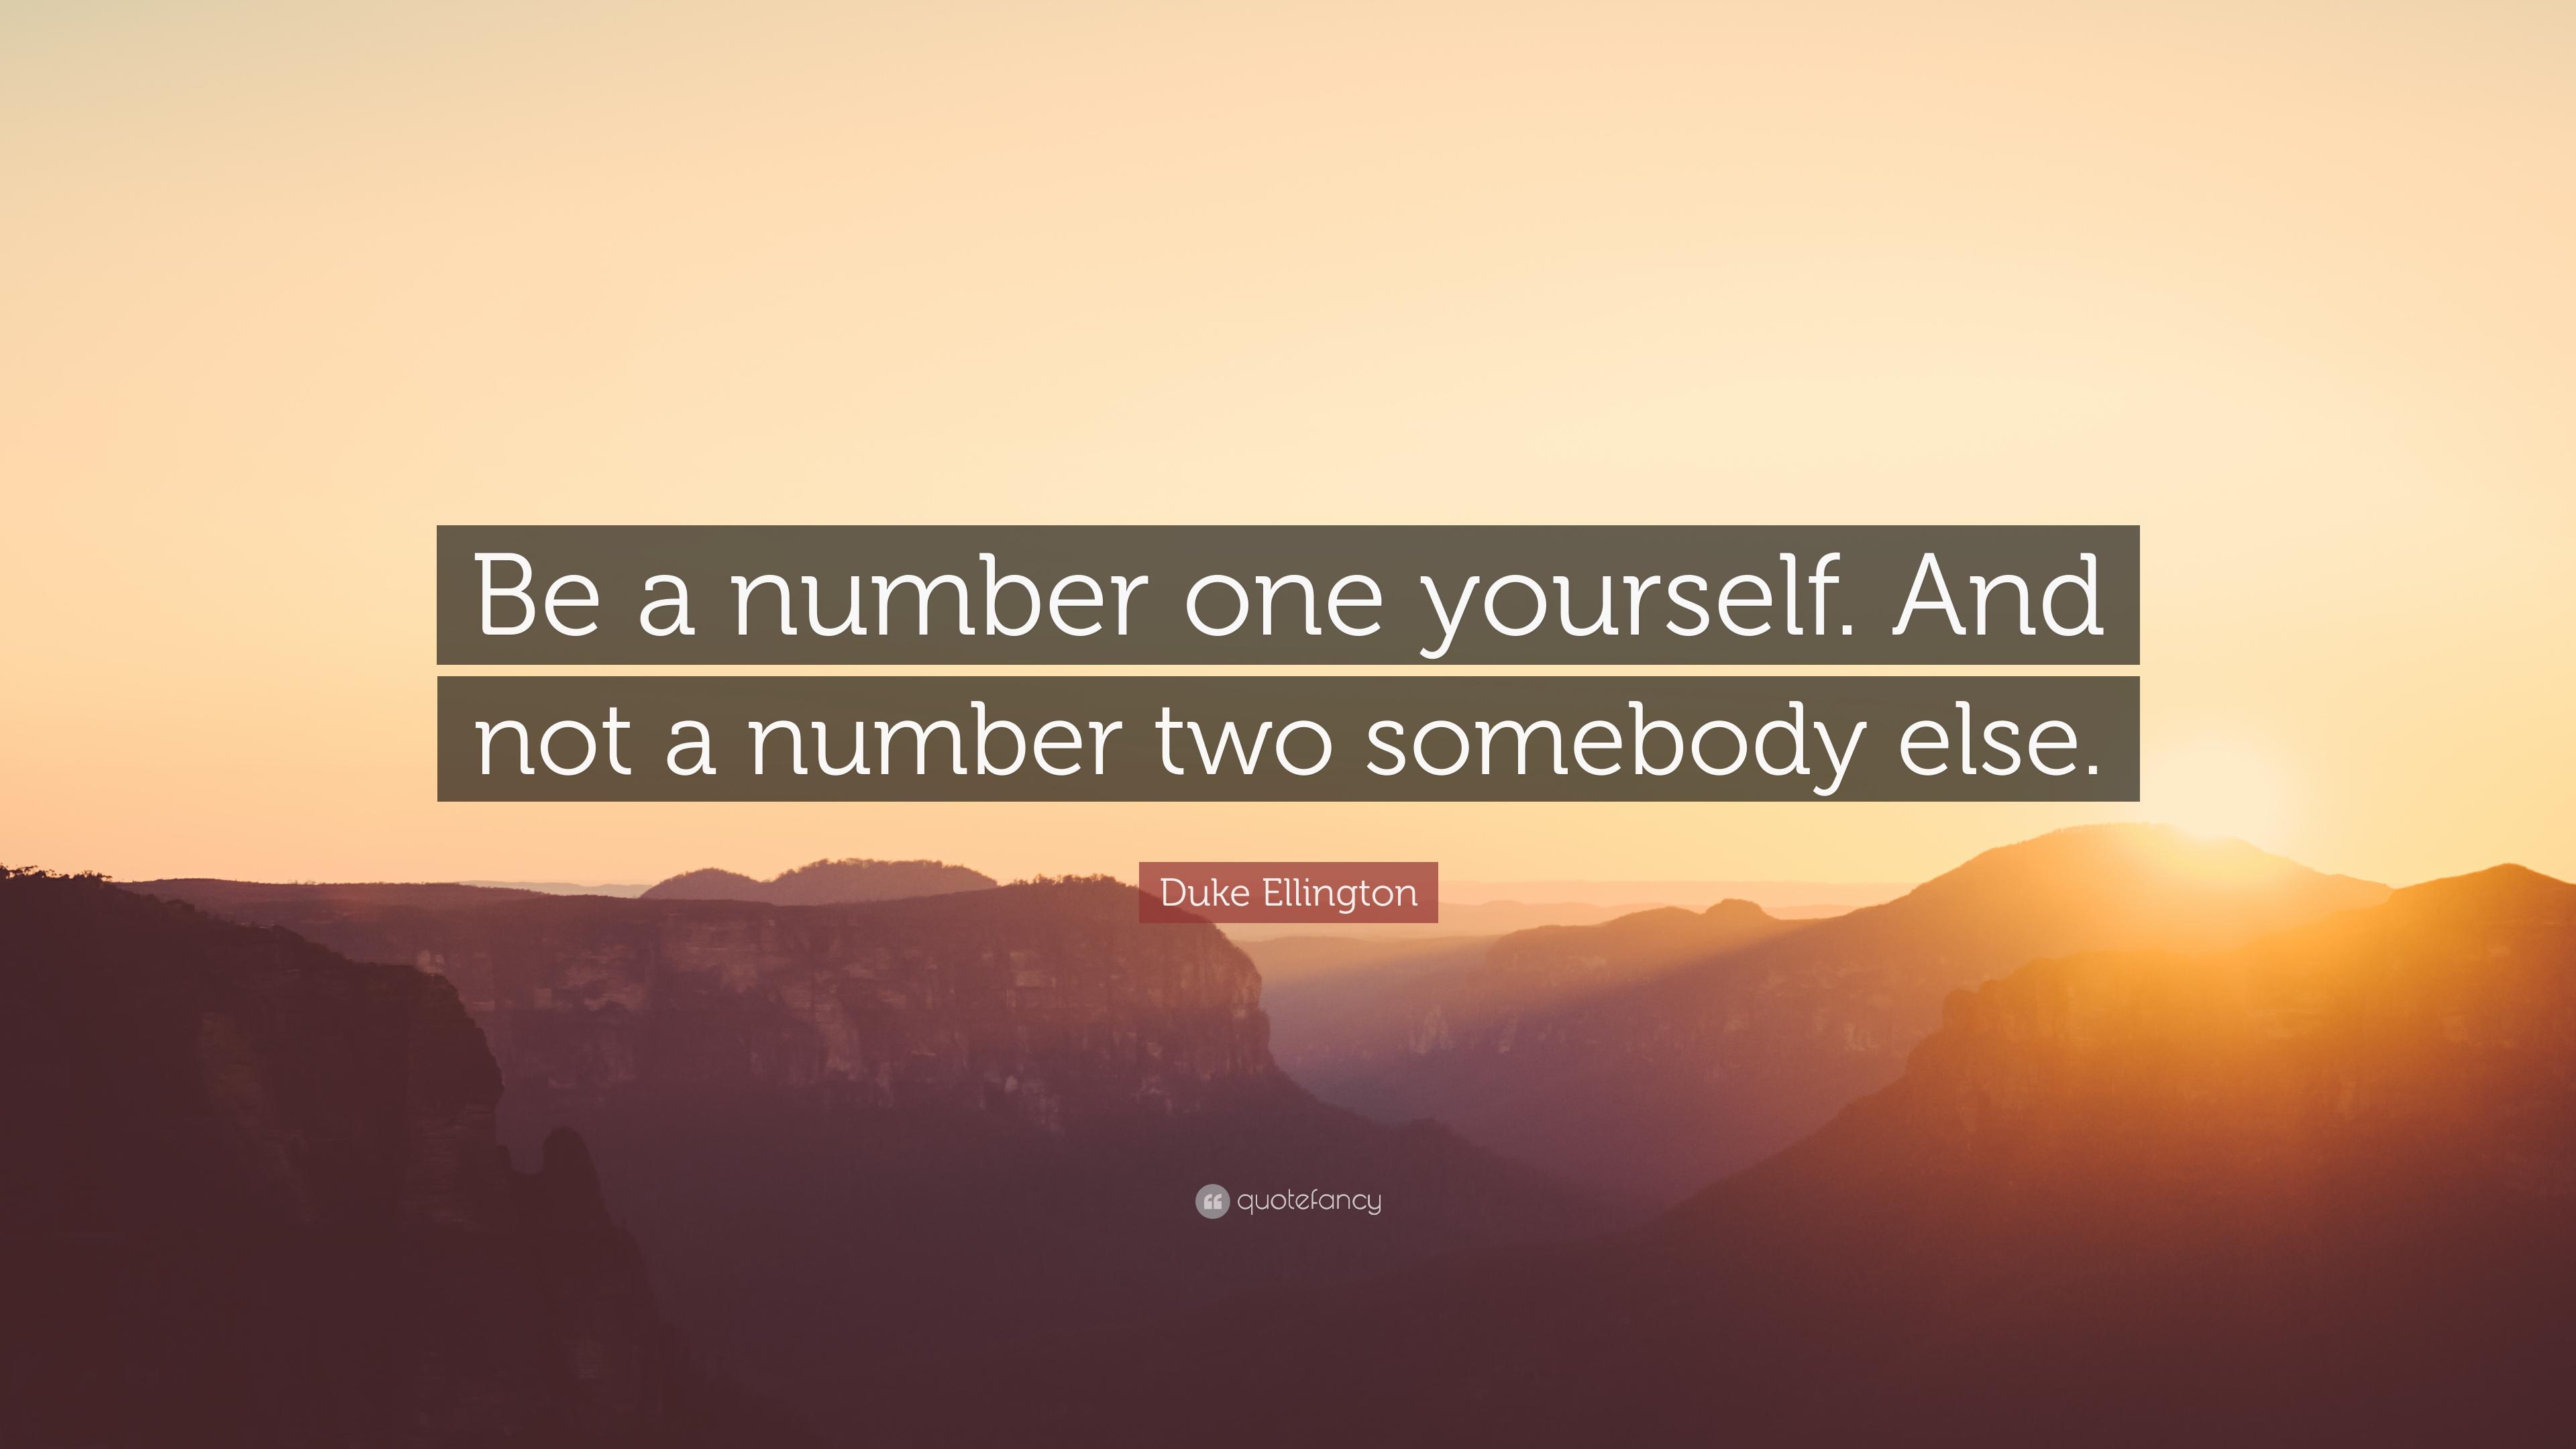 Duke Ellington Quote: “Be a number one yourself. And not a